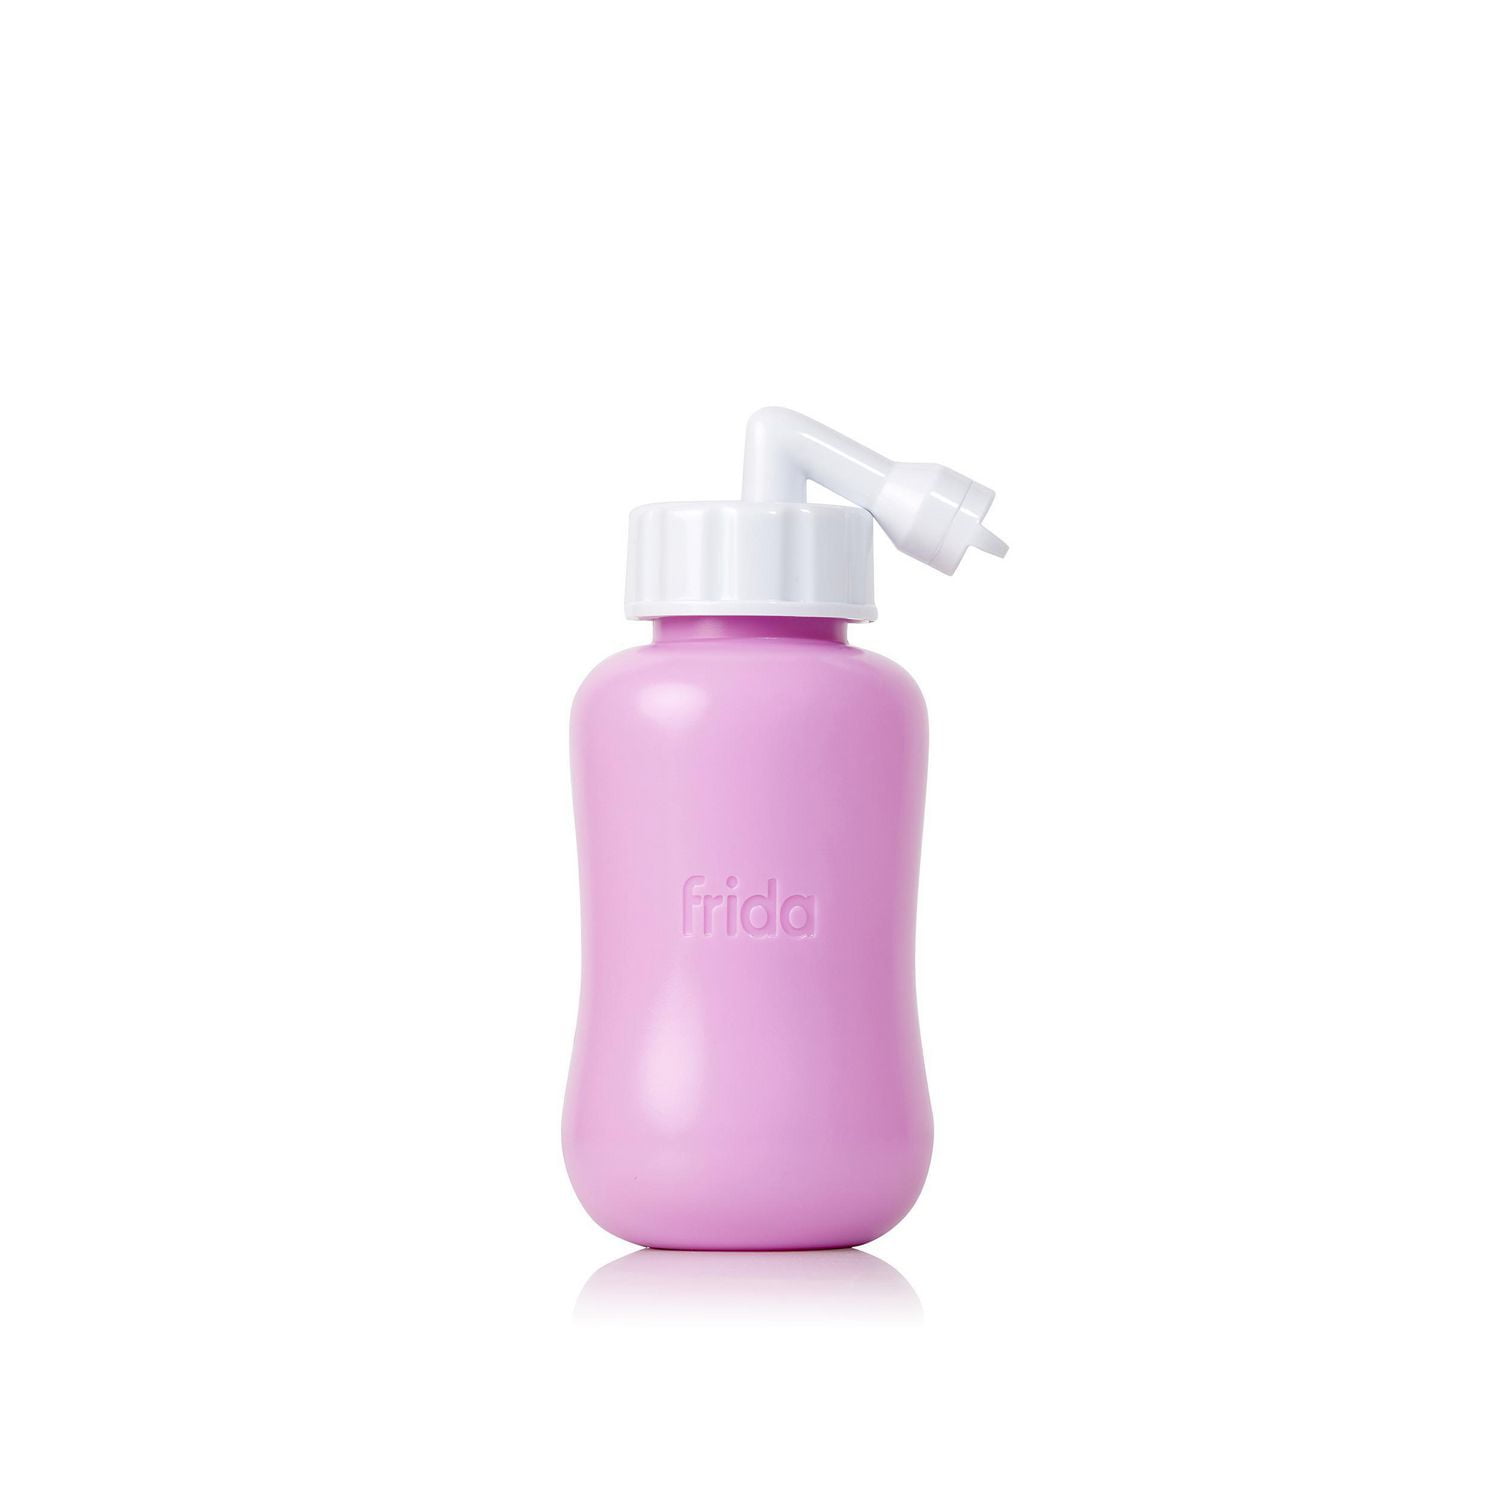 Frida Mom - Upside Down Peri Bottle - Postpartum Recovery - The Original  Fridababy MomWasher for Perineal Recovery and Cleansing After Birth 